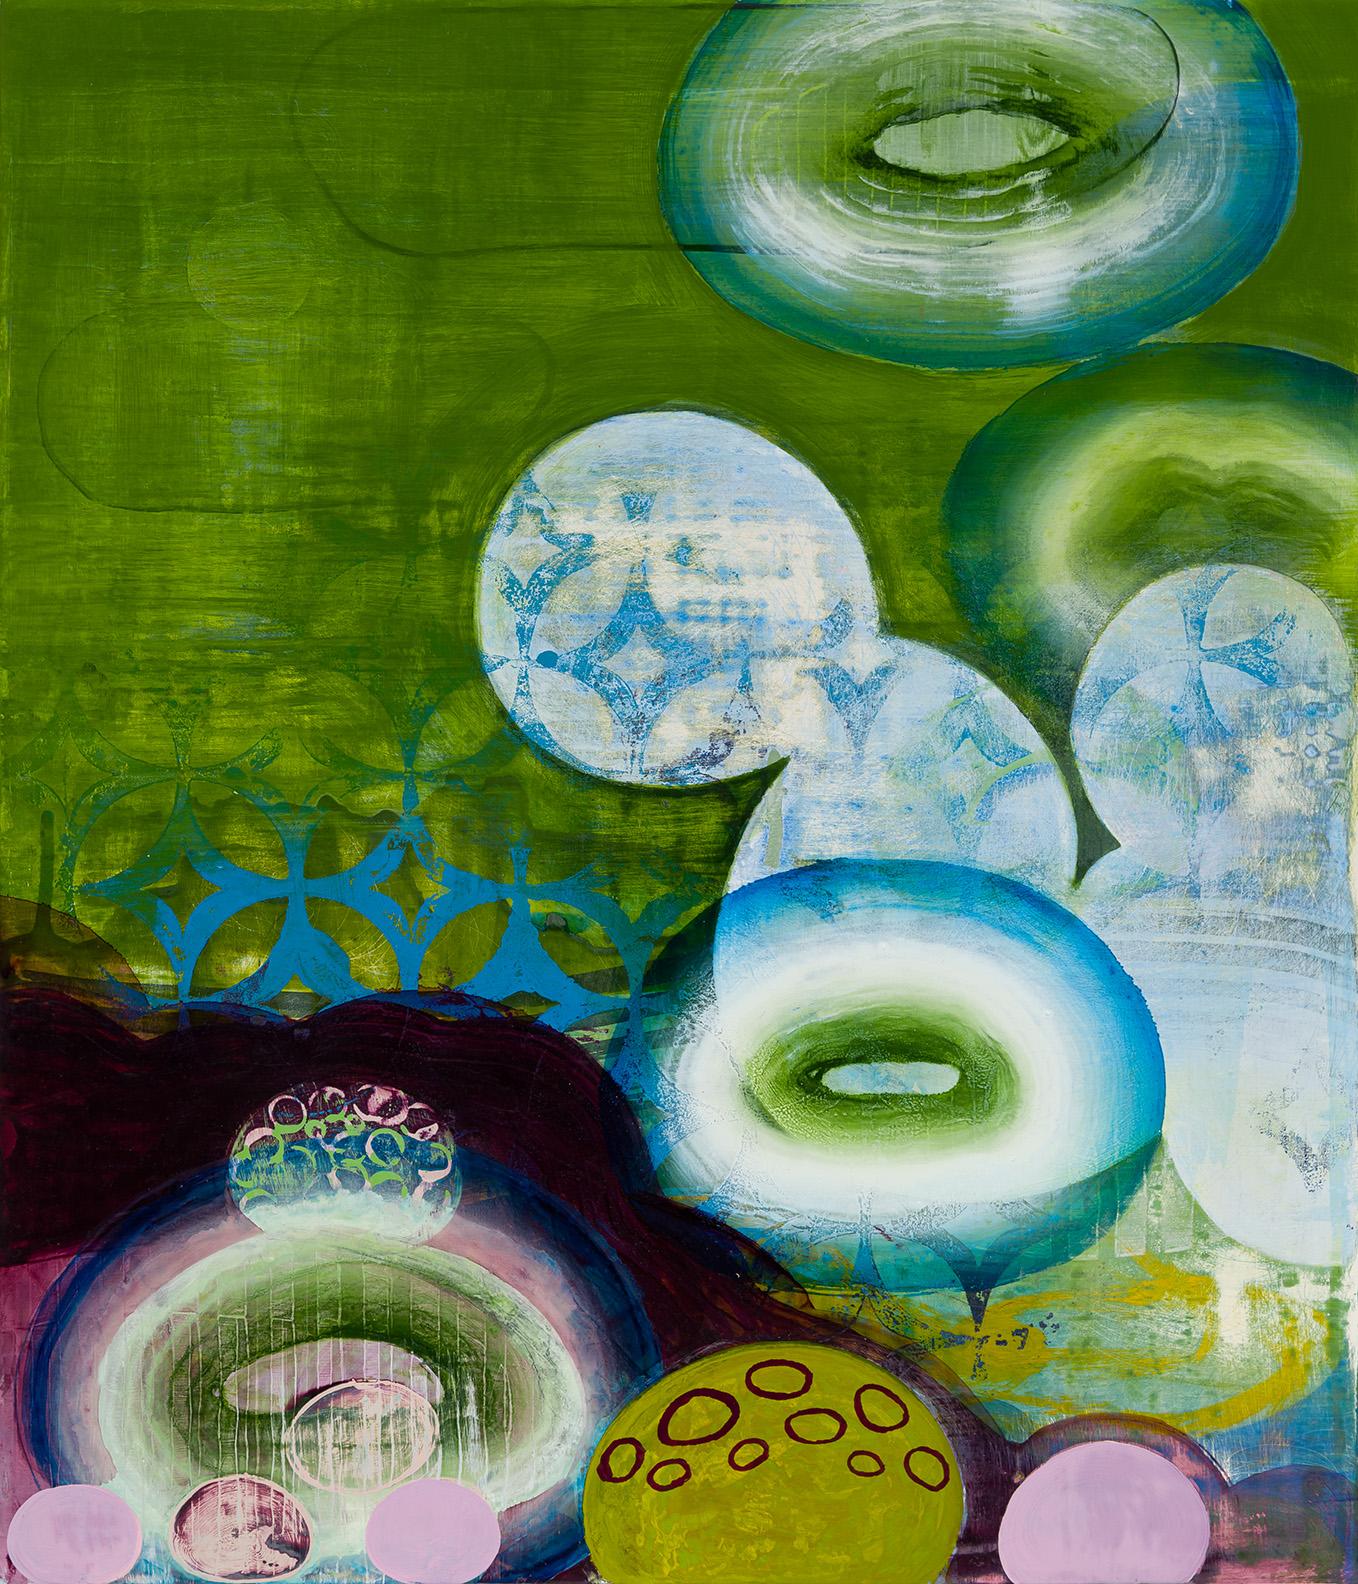 Sarah Lutz Abstract Print - Adrift, green and purple abstract geometric painting on panel